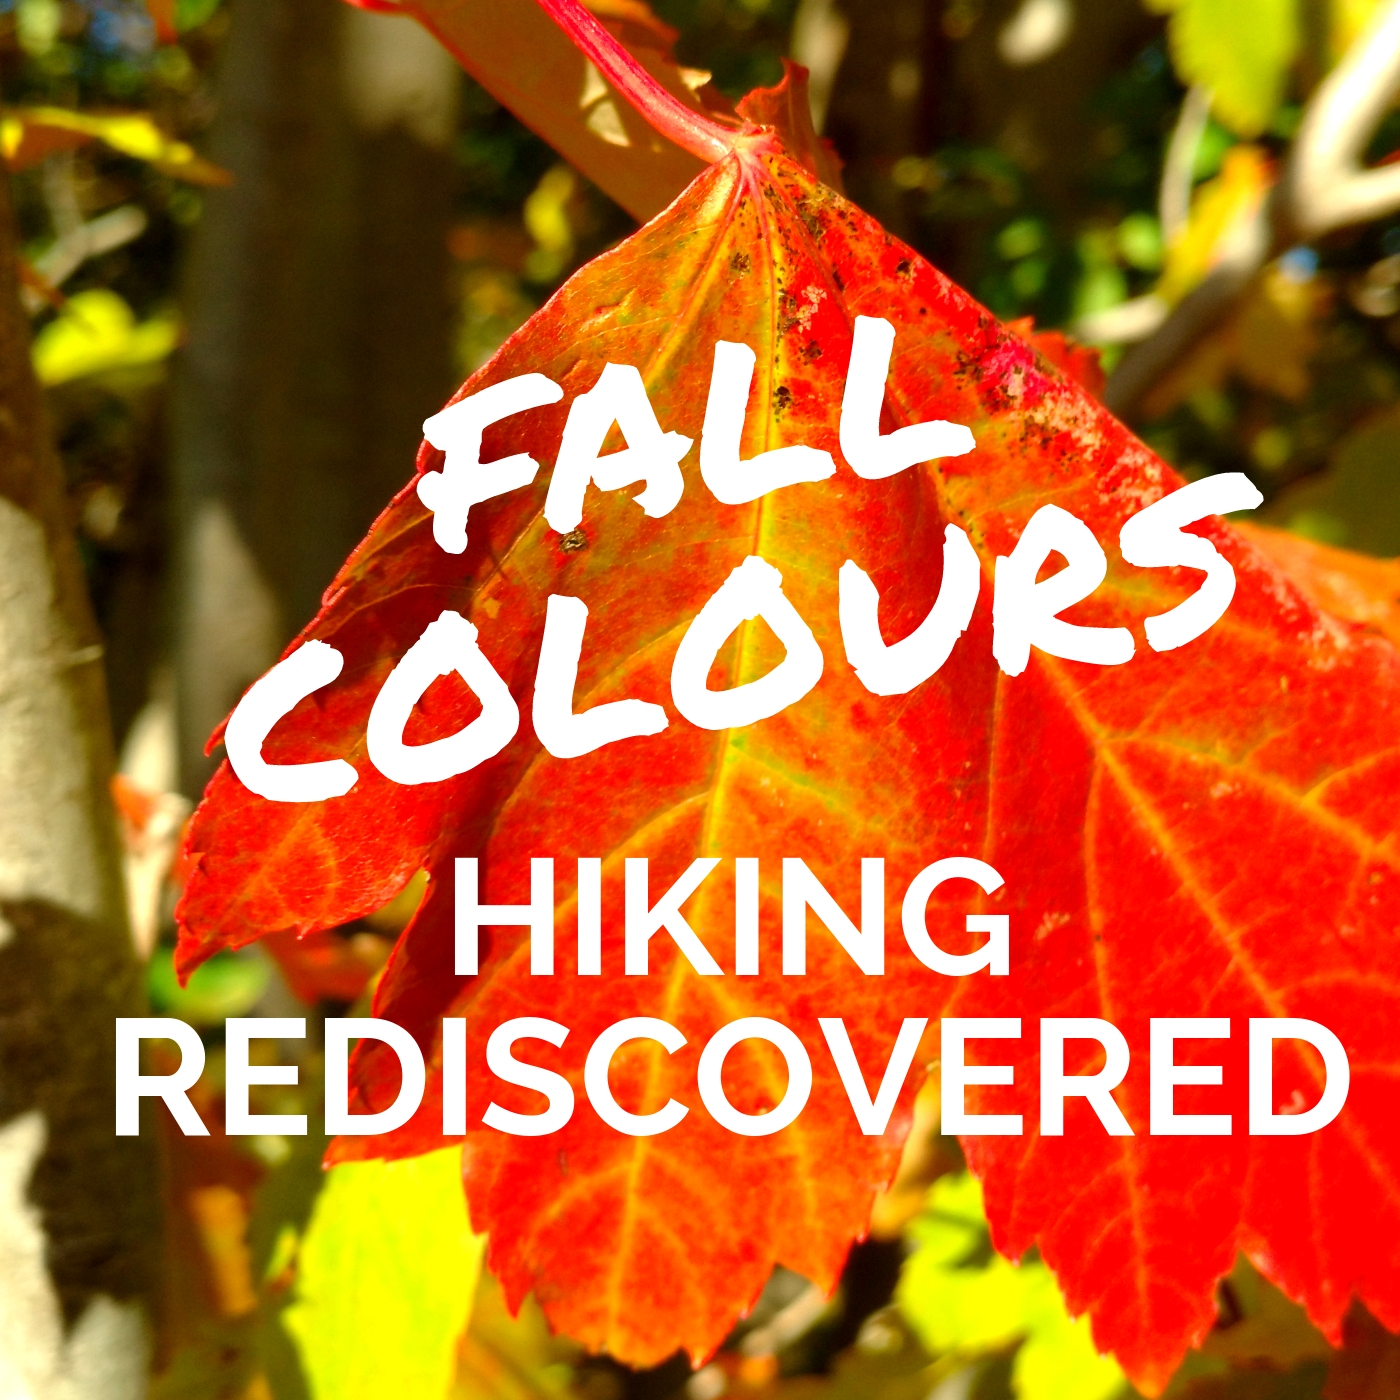 Fall hiking colours rediscovered, hiking in the fall, Wildly Intrepid, Maple leaf